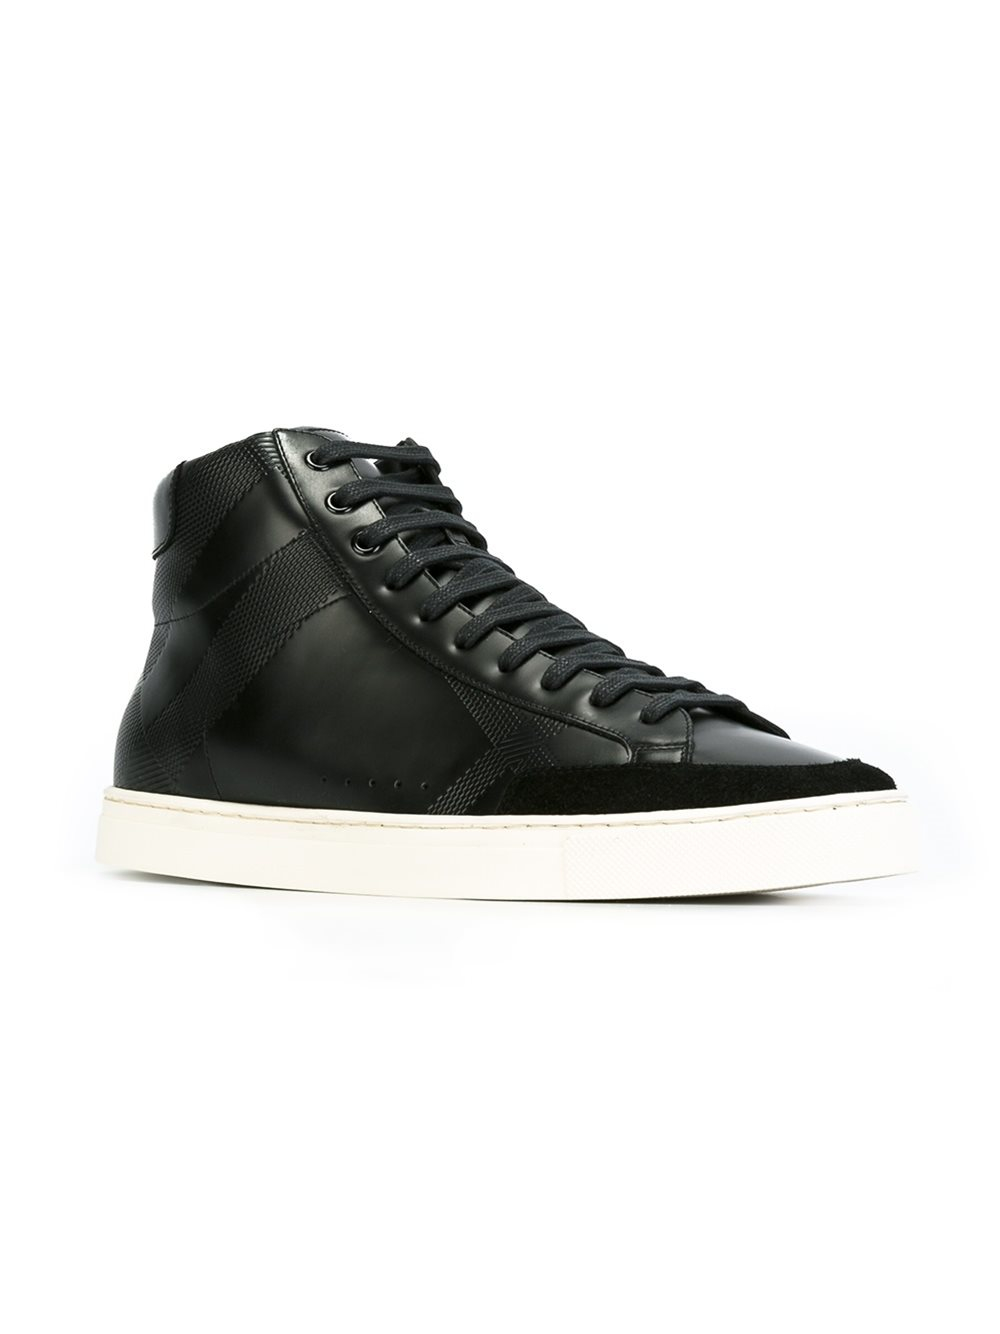 Lyst - Burberry High-Top Sneakers in Black for Men